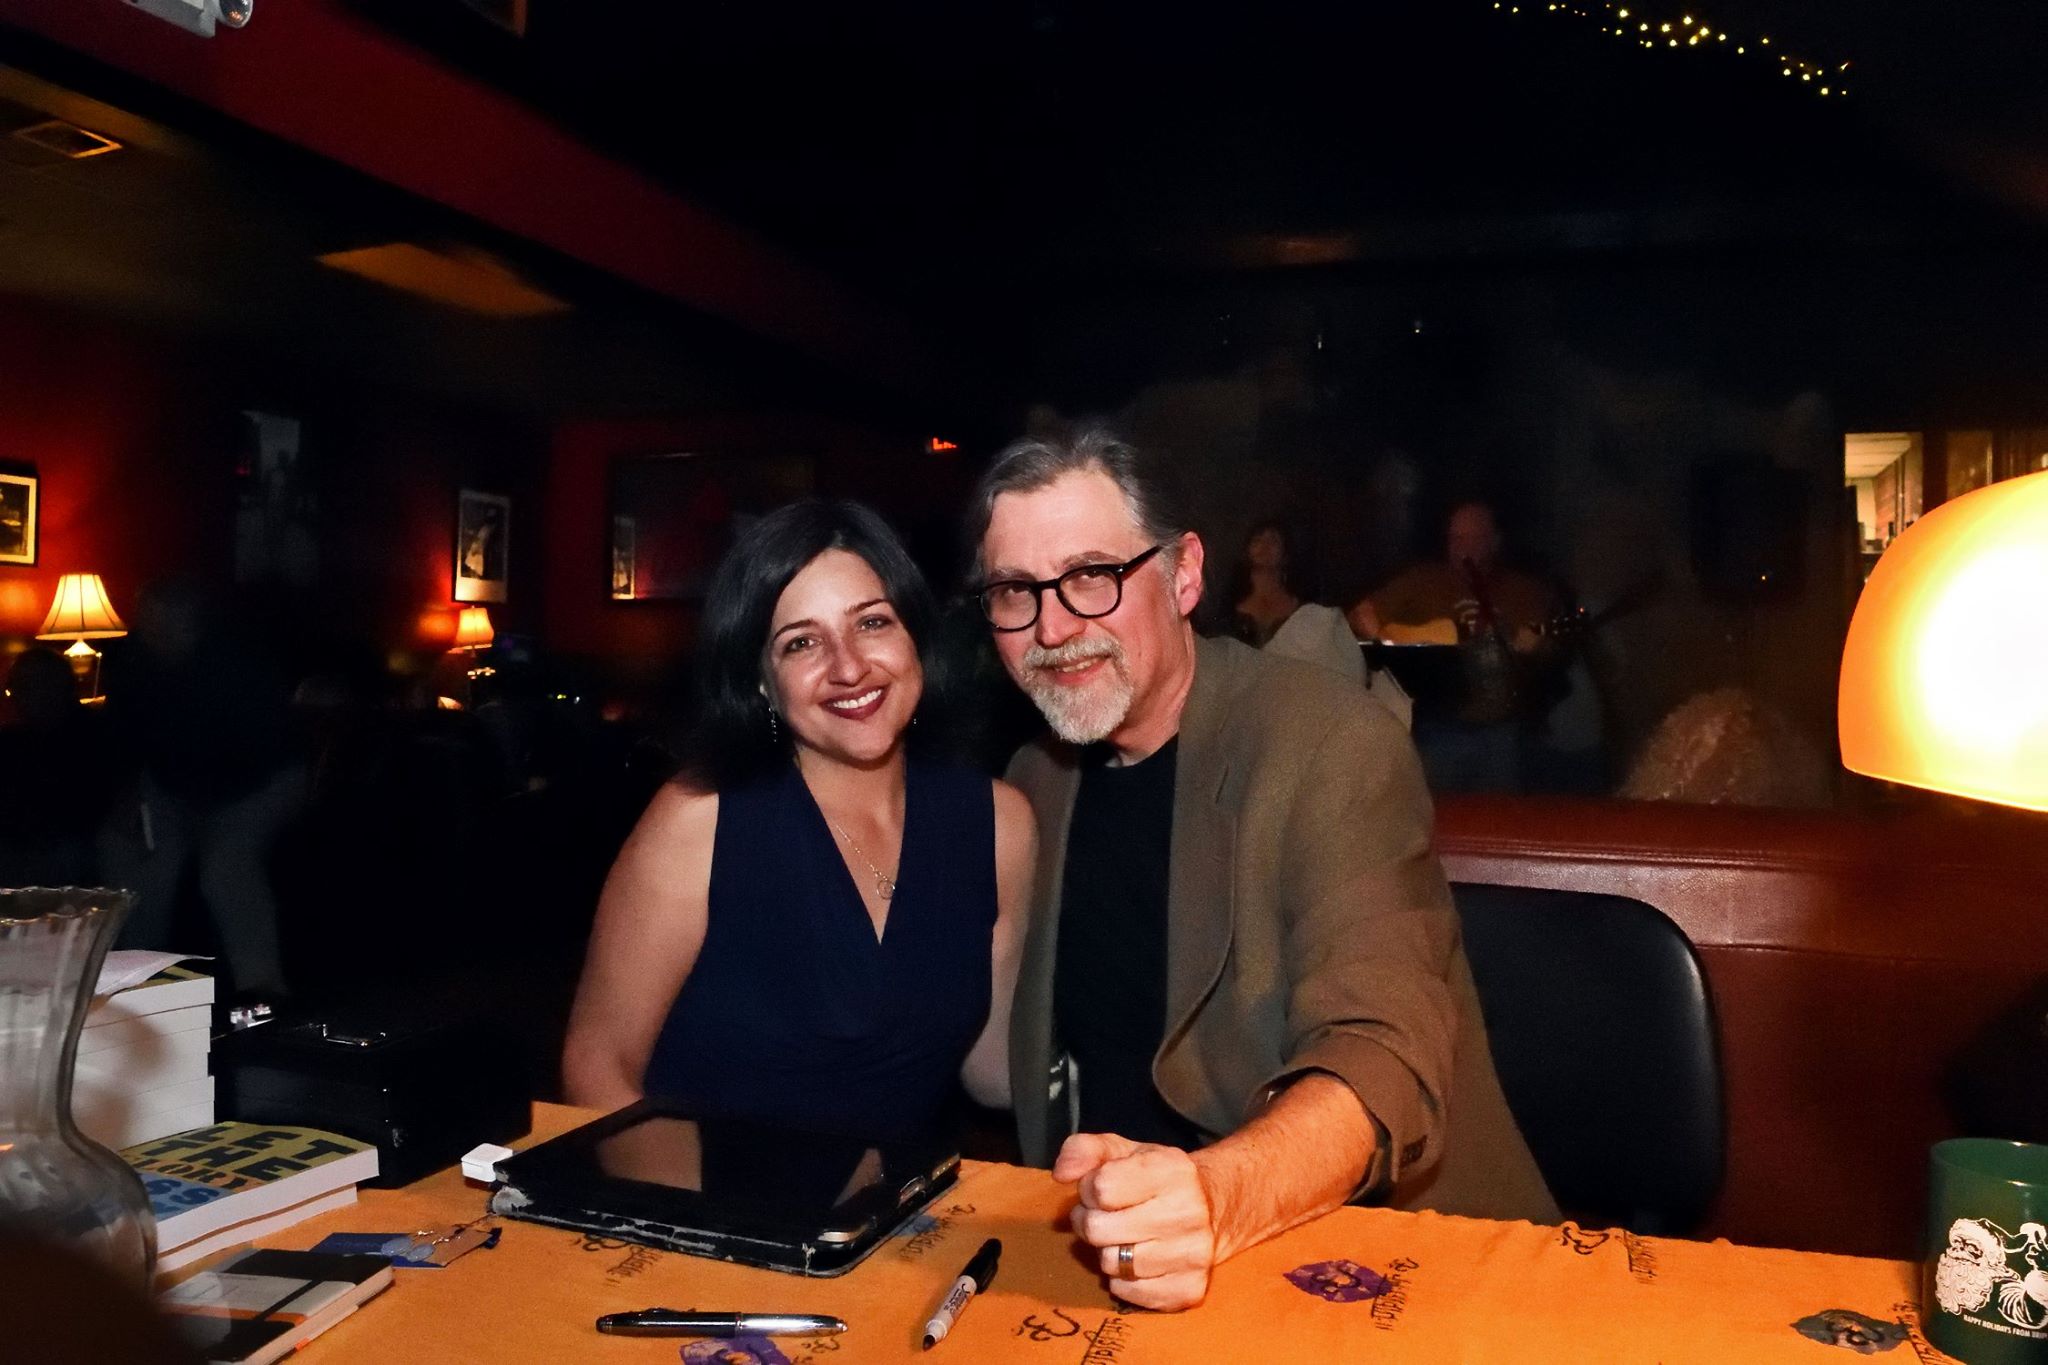 The author and his publication collaborator, Catherine A. Shuler.